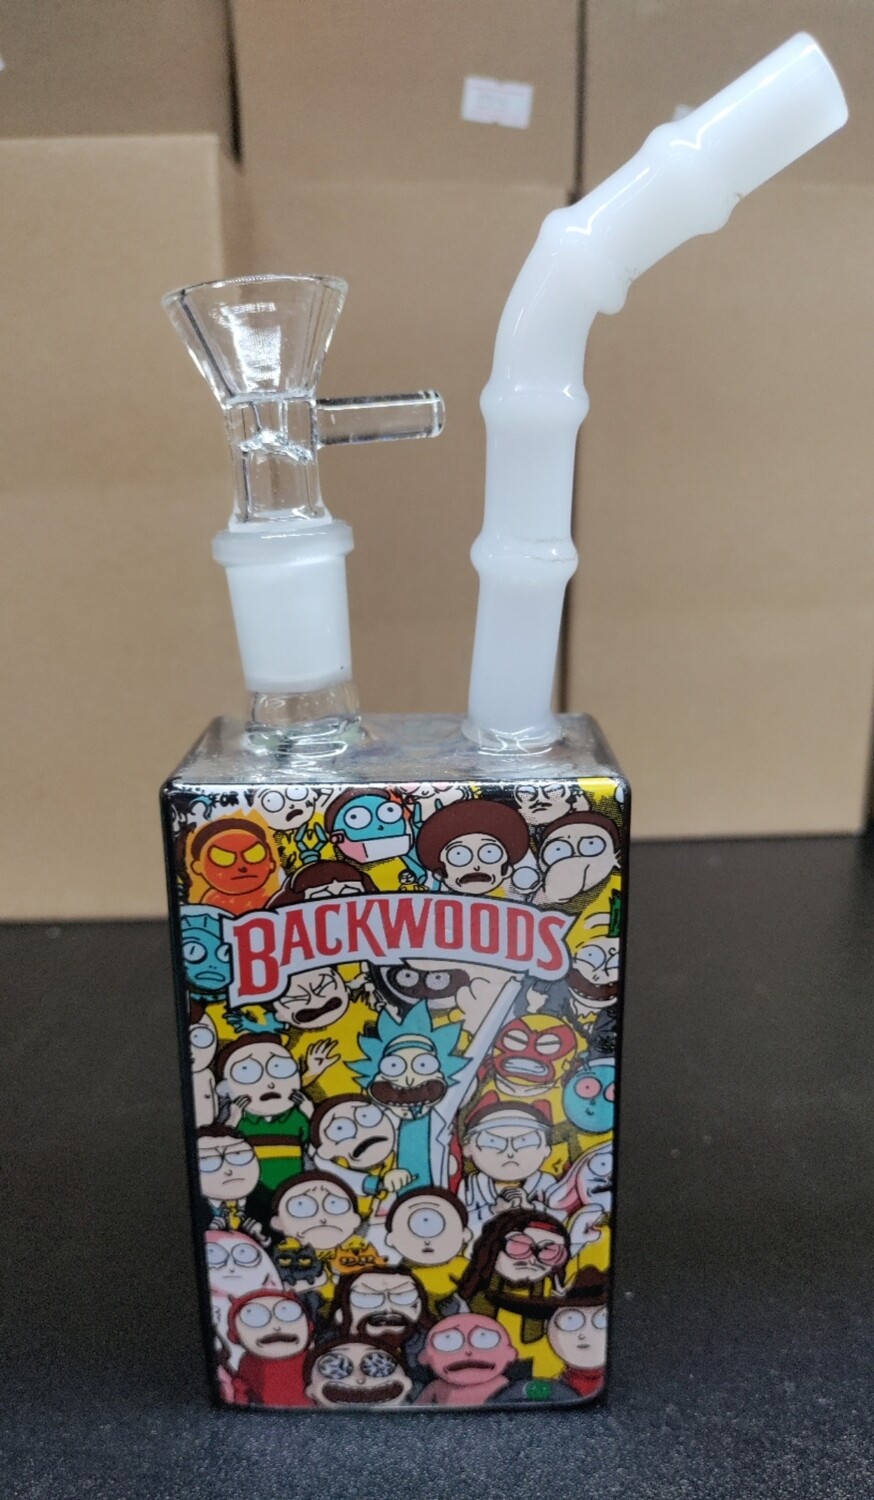 Backwoods Rick and Morty different faces juice box